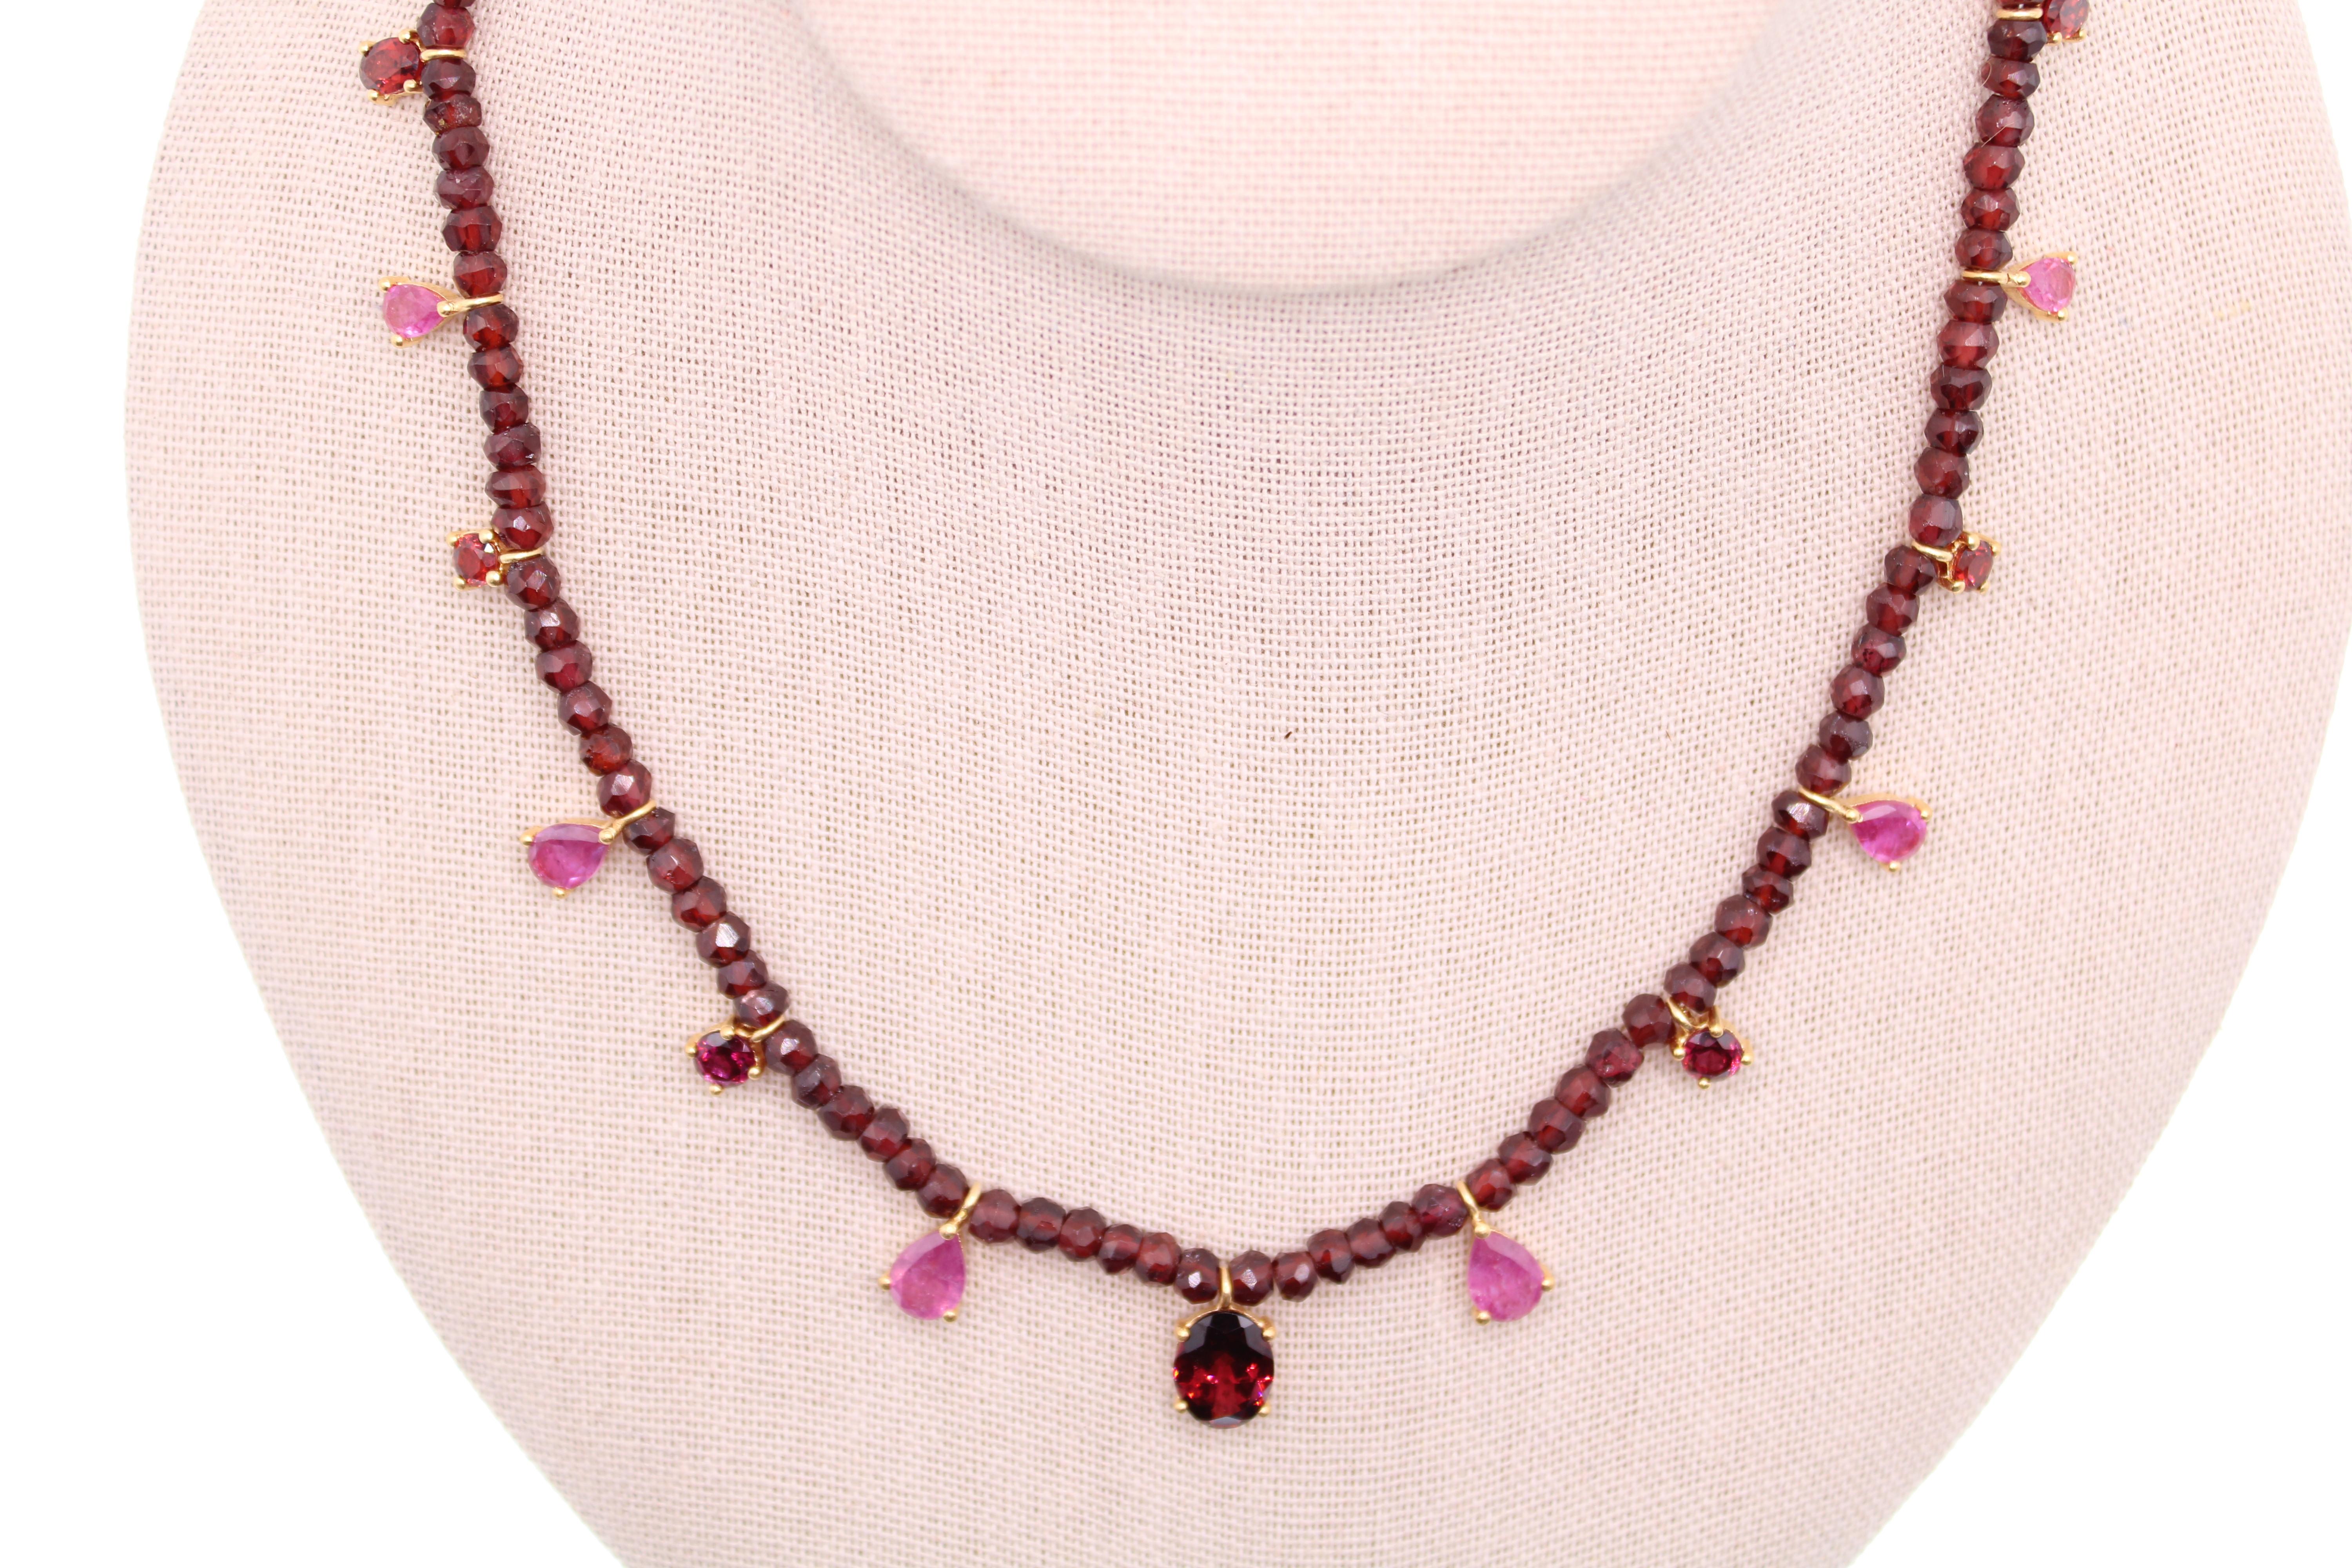 Oval Cut 11.17 Carat Ruby and Garnet Gemstone Beaded Necklace  For Sale